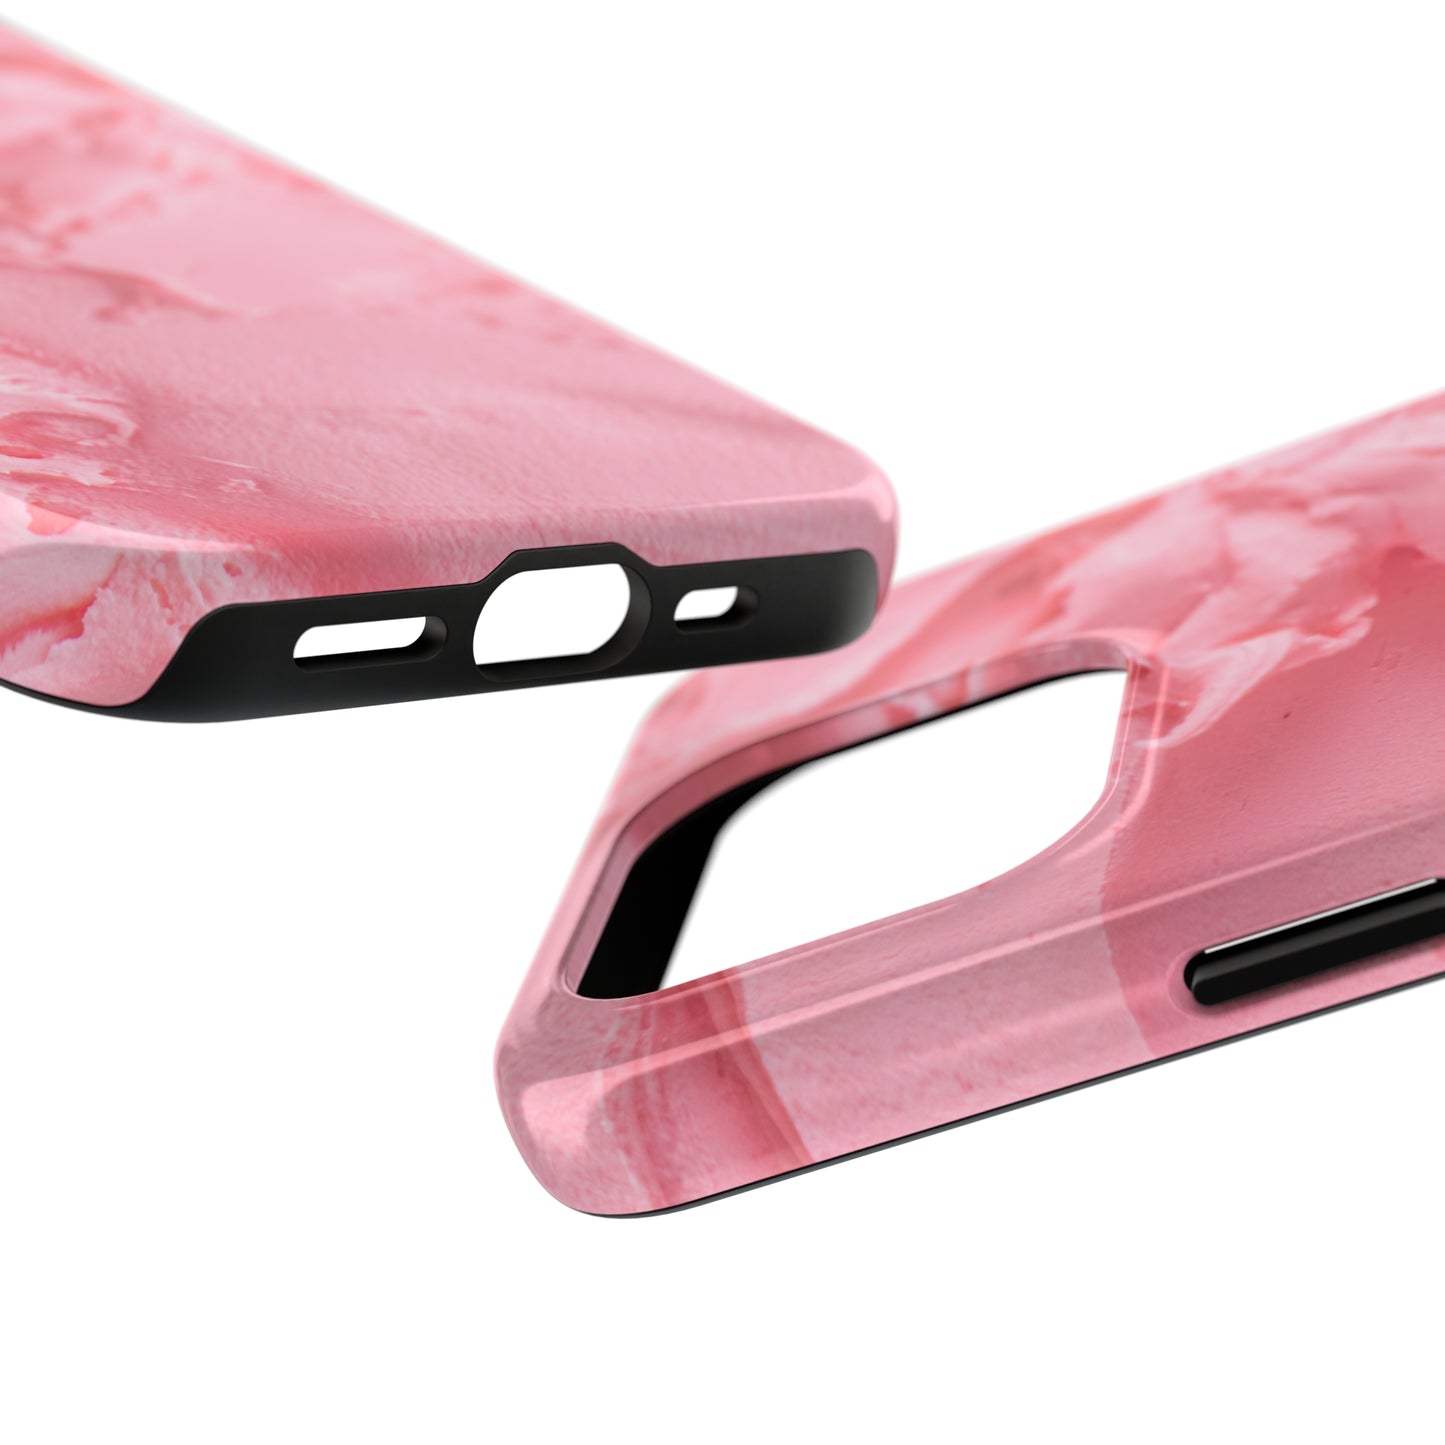 Yummy Pink Frosting Phone Case